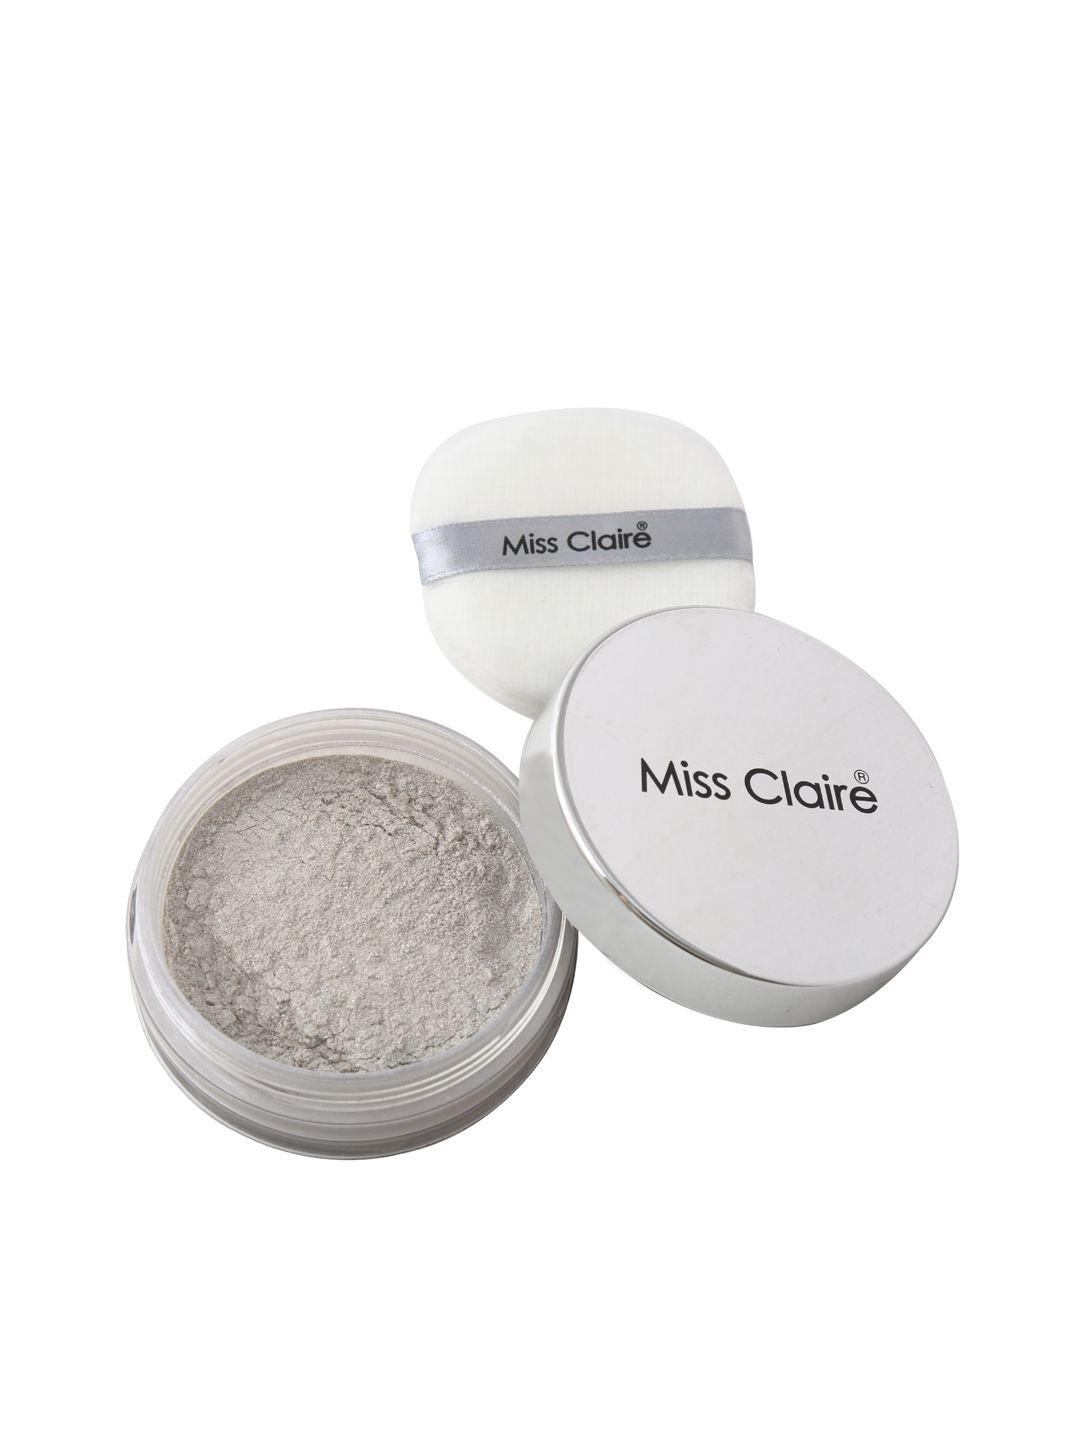 miss-claire-pearl-04-blooming-face-powder-7g